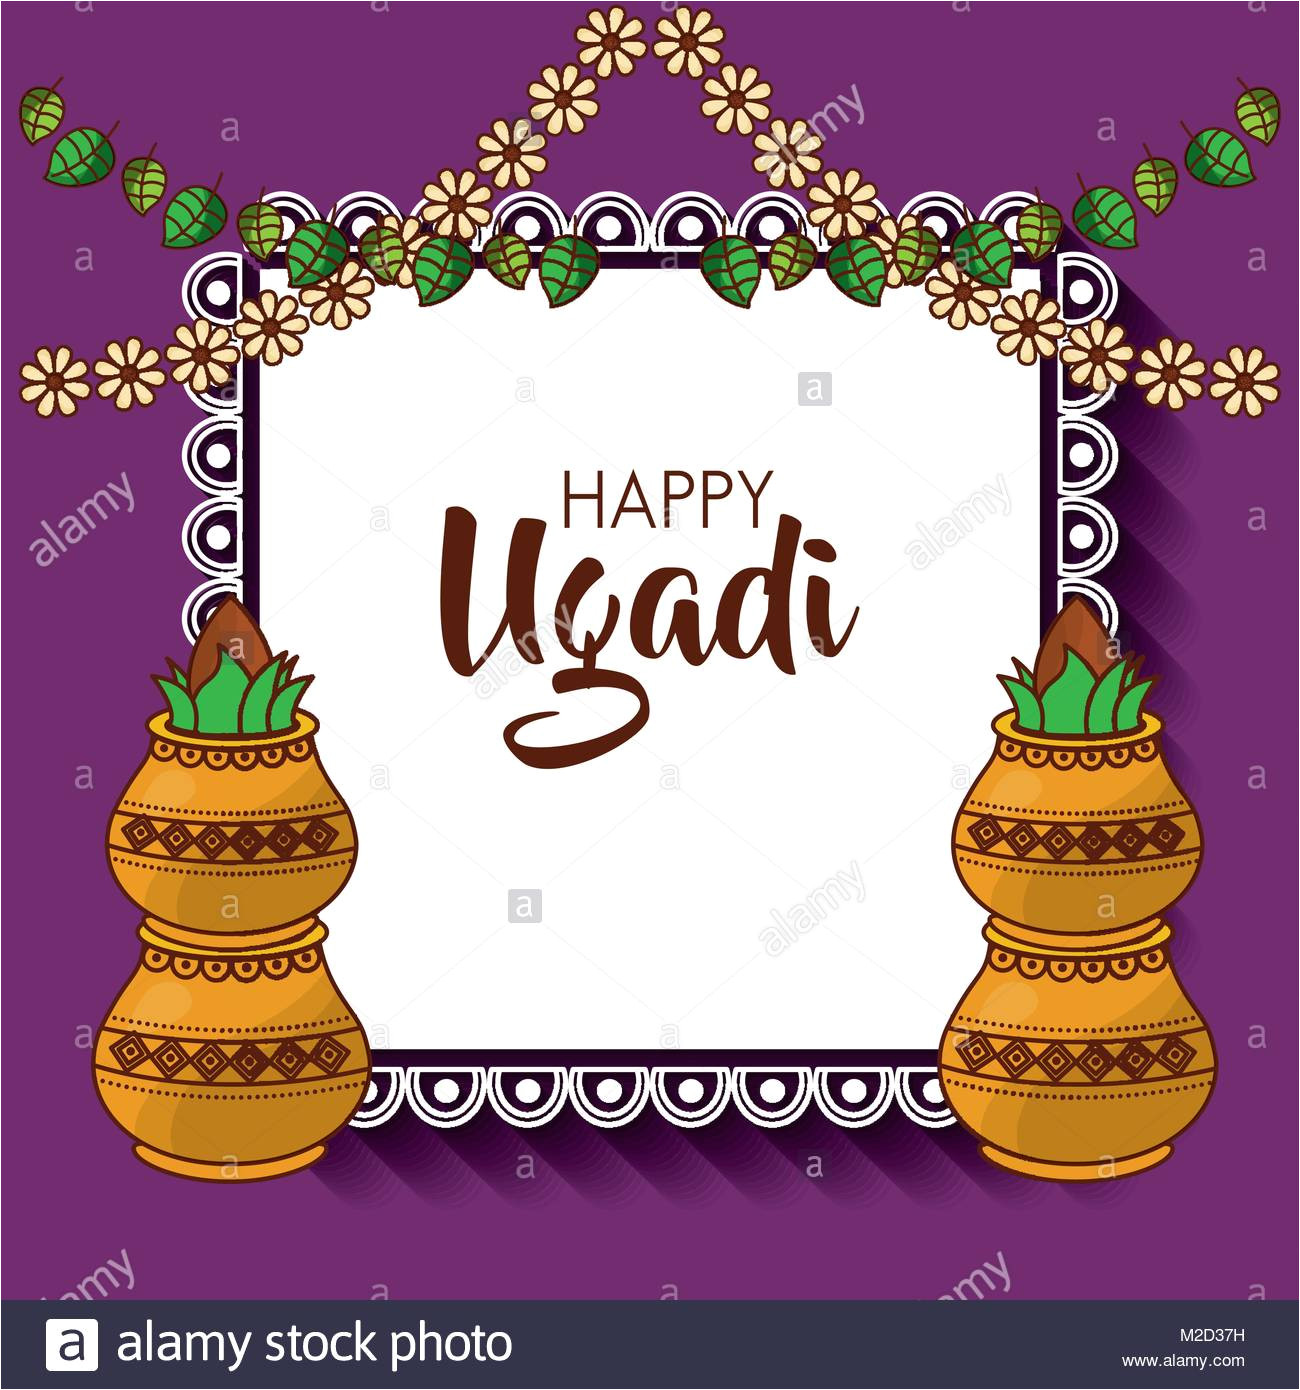 happy ugadi hindu new year greeting card pot with coconut flowers m2d37h jpg